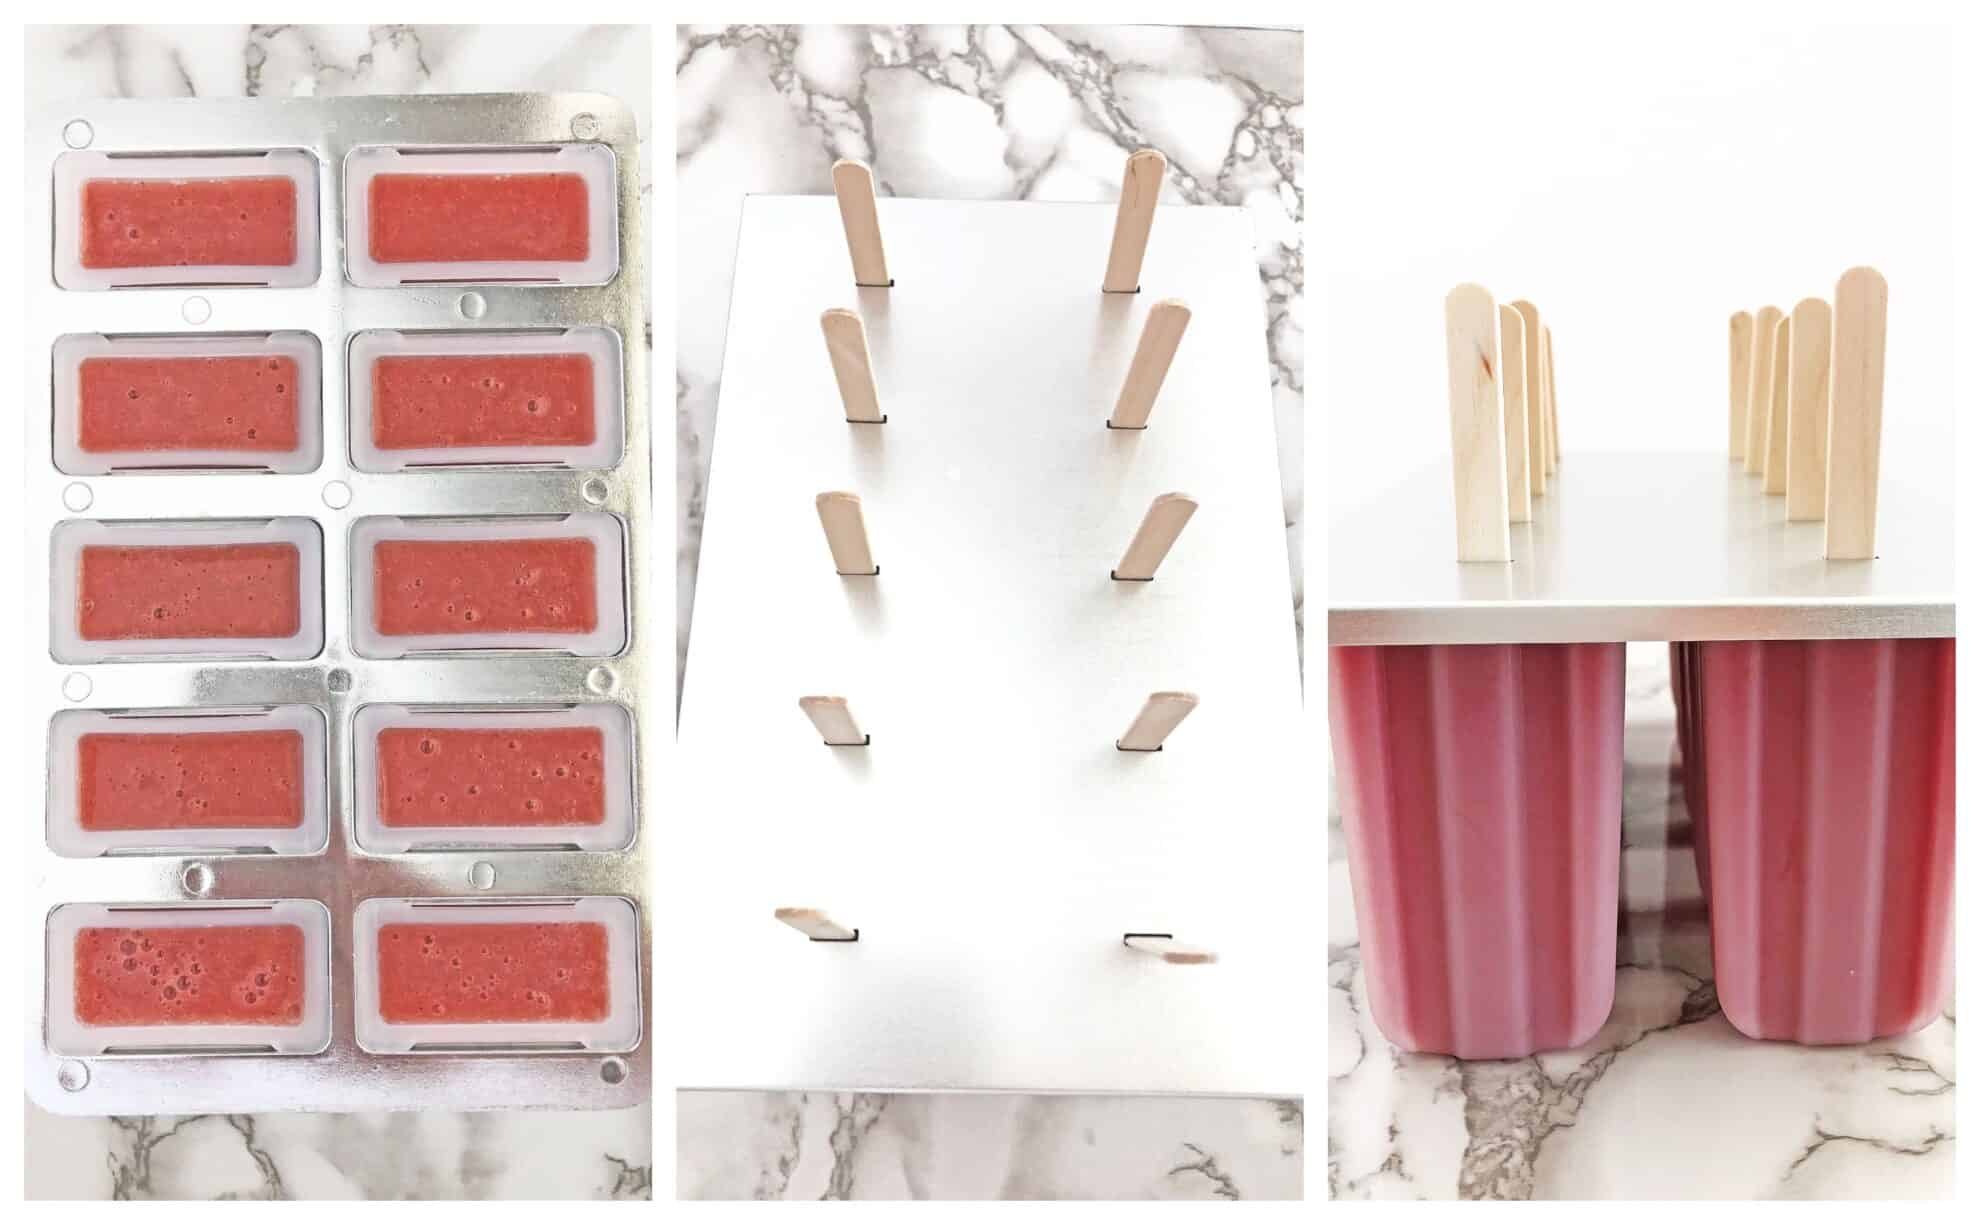 Finally, pour the mixture into each popsicle mold. Cover the ice pop maker with its cap, inserts wooden sticks into each popsicle opening, and place it in the freezer for 12 hours.